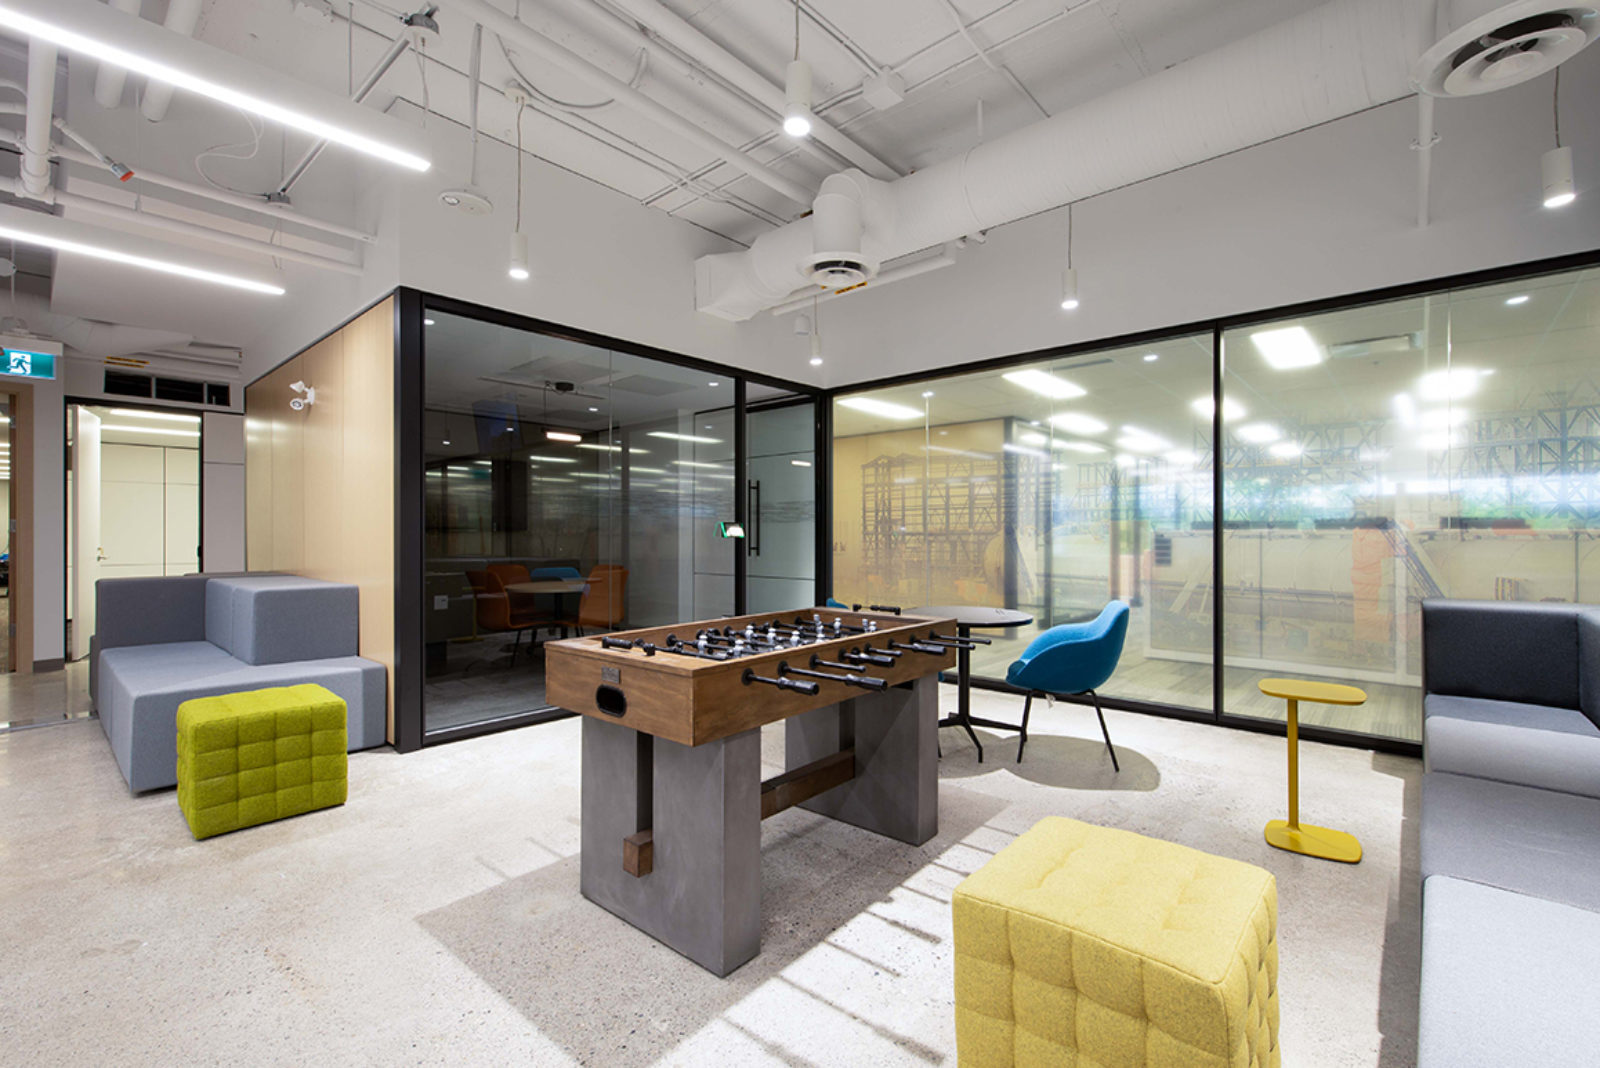 Industrial room with concrete floor, exposed ceilings painted white. Foosball table, lounge pieces and DIRTT modular room create a fun energetic space